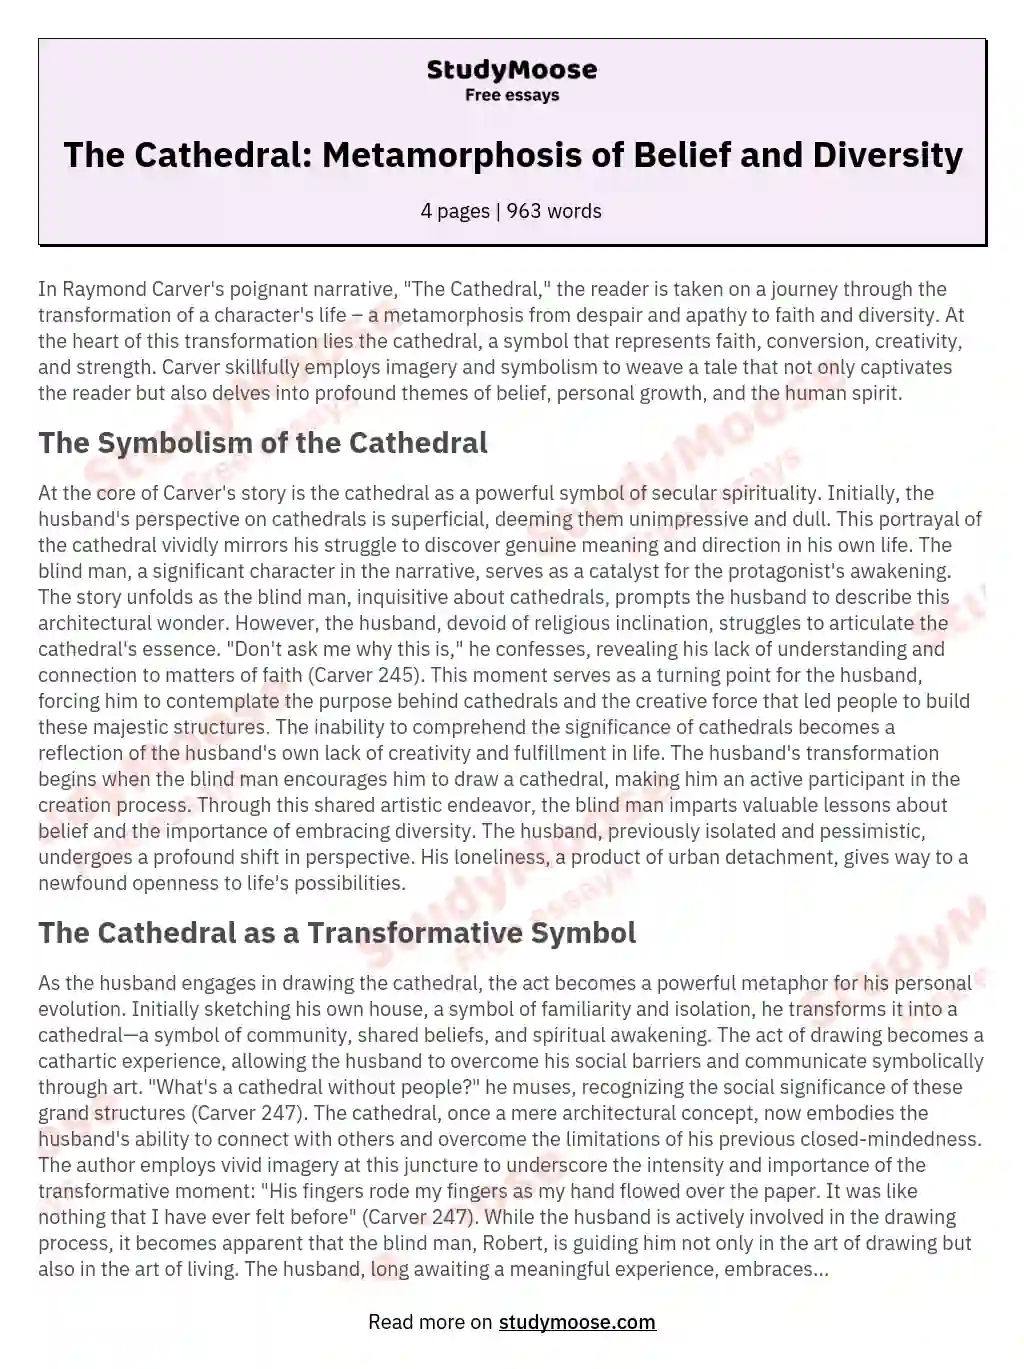 The Cathedral: Metamorphosis of Belief and Diversity essay